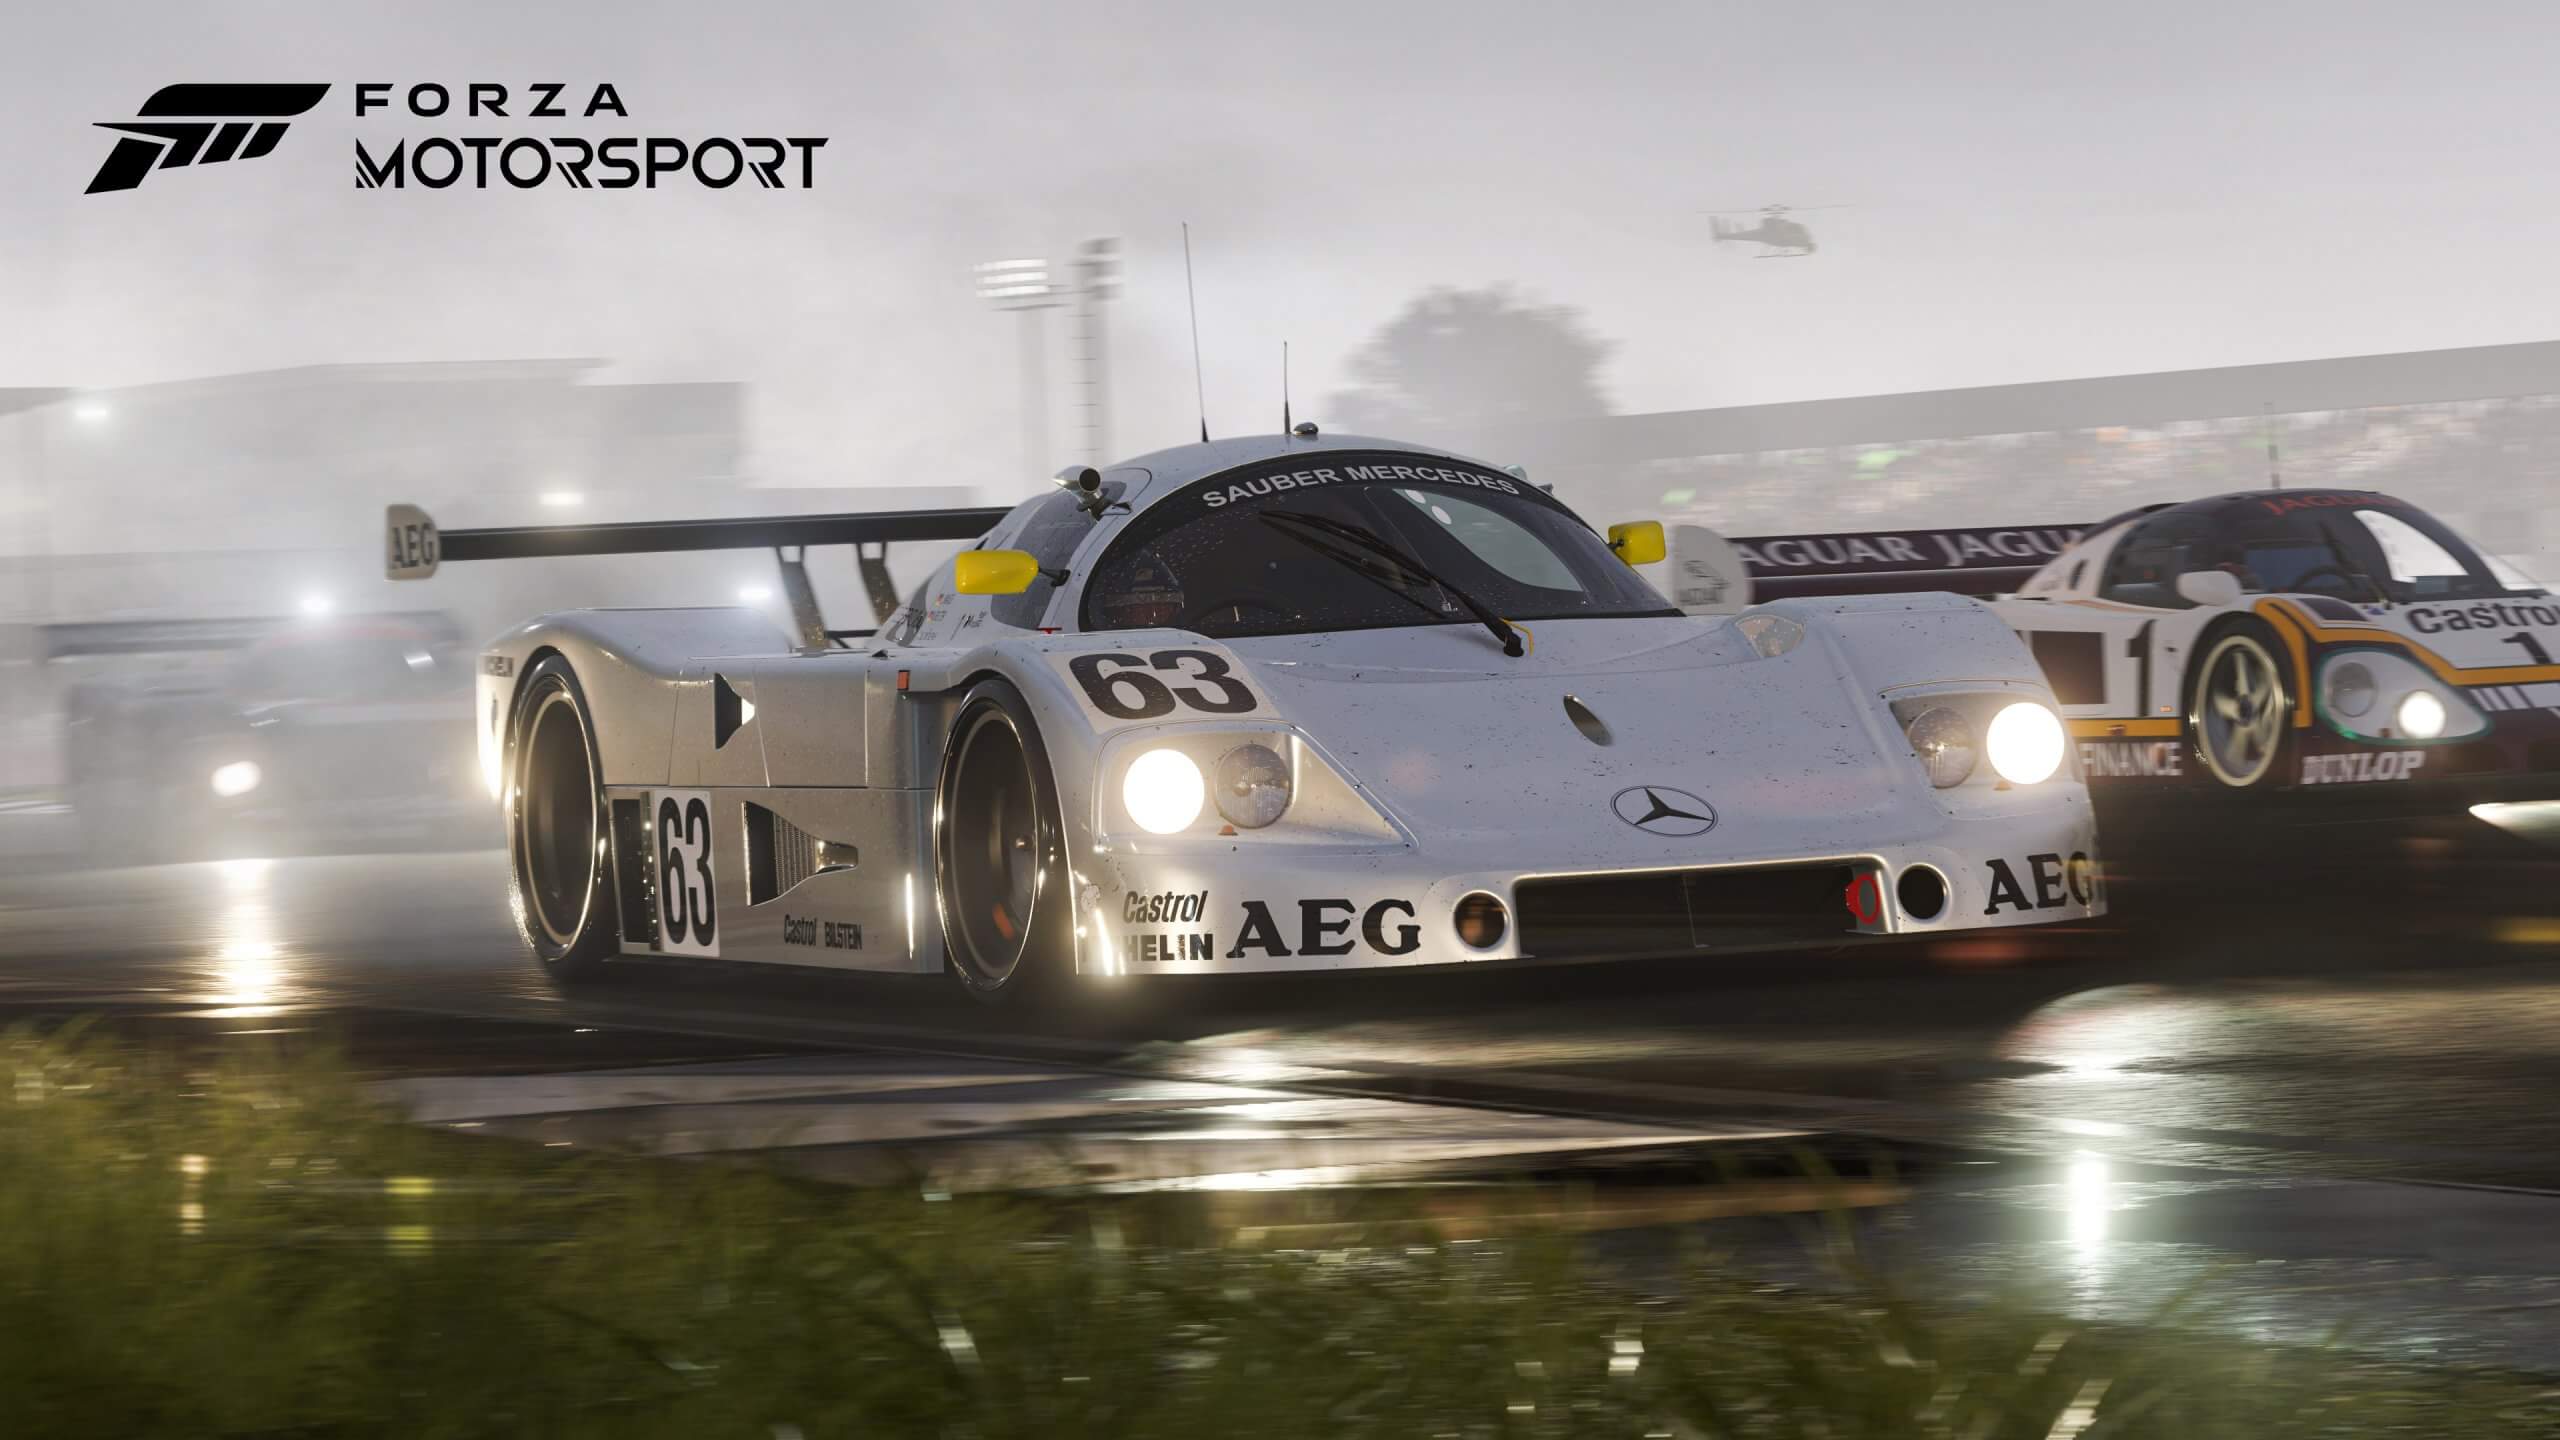 Forza Motorsport's latest update adds its first free DLC track